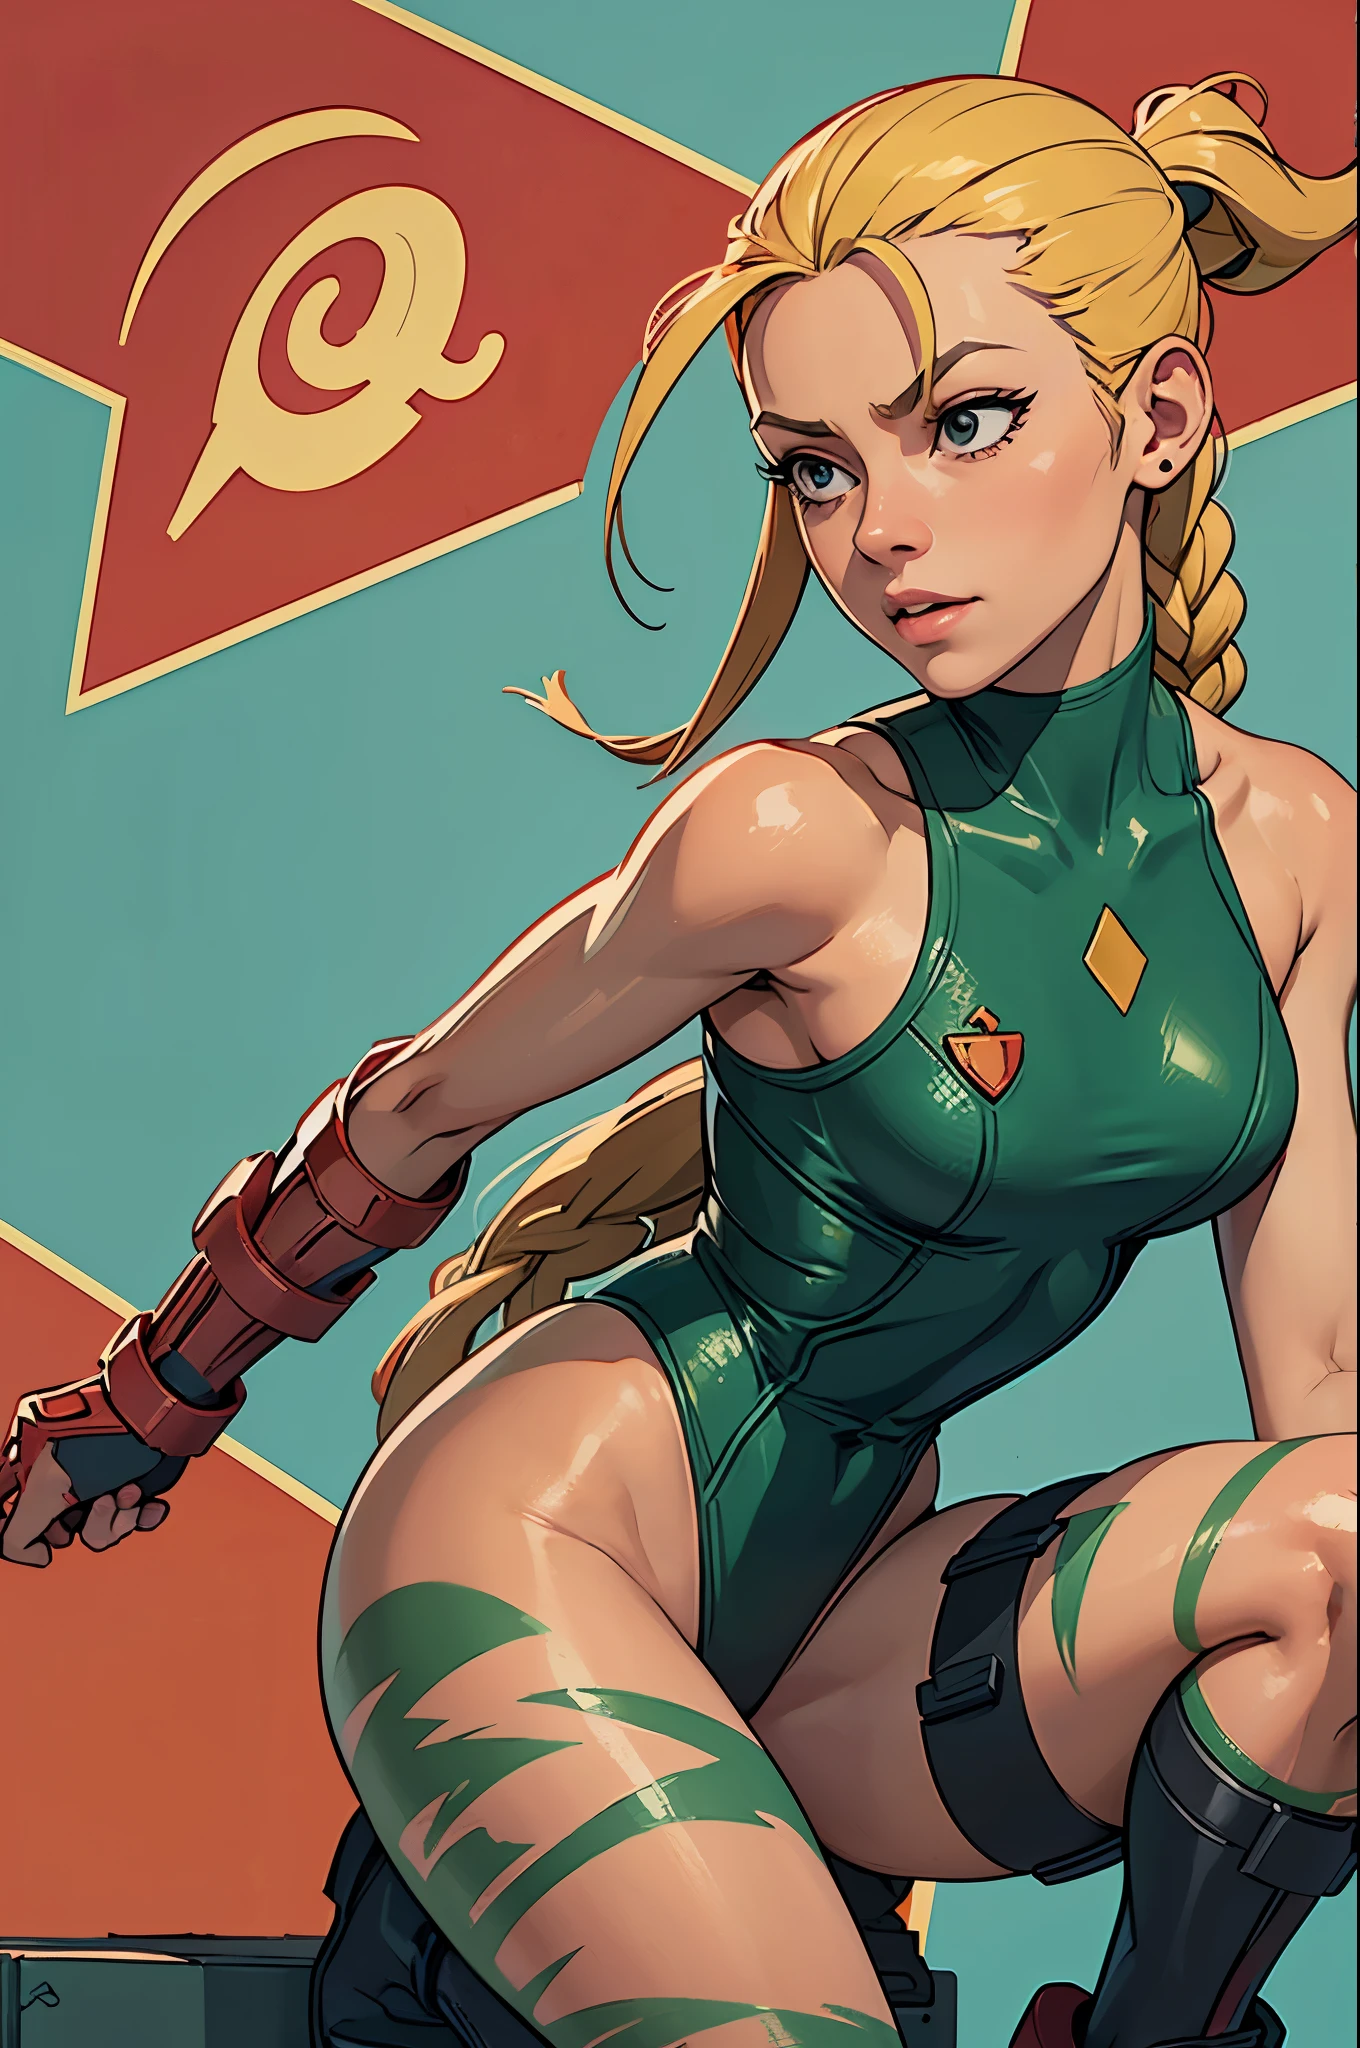 Masterpiece, 4k, highly detailed, Cammy de Street fighter, Looking to the camera, blue eyes, platinum blonde hair combed into long pigtails with a small blade of bangs over her forehead, Titis is quite, Cammy, ((a scar on his left cheek)), Beautiful woman dressed as a military man ((Green thong class leotard and the Delta Red triangle insignia on her left chest)), ((military tactical stolera)), (((On his head he wears a red military beret))), Black combat boots and red gauntlets, (his legs are sparsely decorated with green camouflage paint), Clear half-body image, smiling at the viewer, Extreme amount of details, (Make every pixel count to draw the most beautifully detailed art you can:1.1), analog style, bright colors, symmetrical, centered, close up, female, athletic, fit, narrow waist, high, tanned skin, [(colorful explosion psychedelic paint colors:1.1)::0.125], realist body proportions, realist, photo-realist, 8k, highly detailed, Led light, laser lights,fruit flavored, (thepit bimbo:0.5), glossy,anatomically correct, symmetricalal anatomy